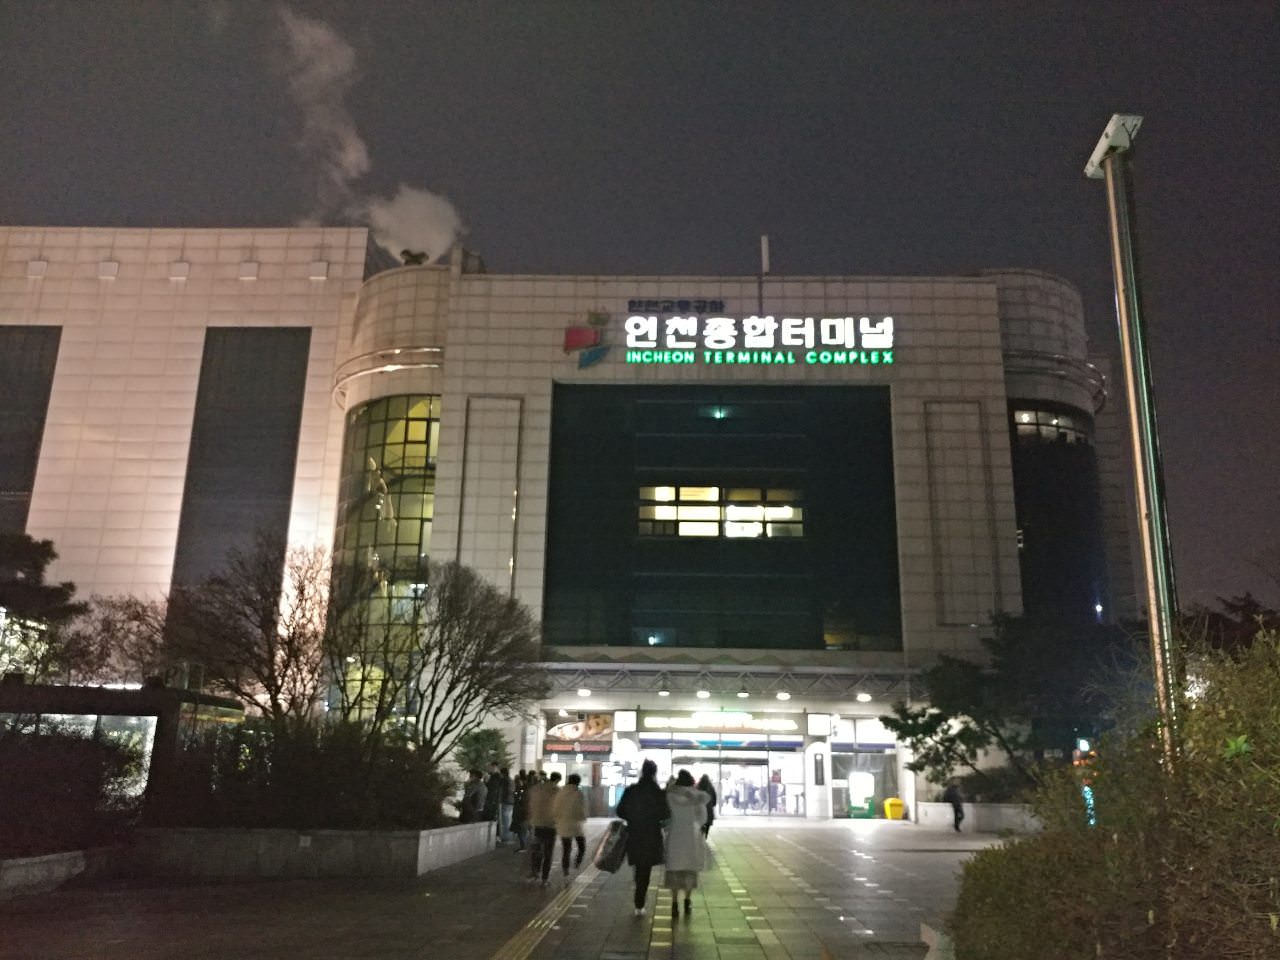 Incheon Bus Terminal Complex is an integrated terminal serving travelers from Incheon City to other cities nearby (inter-city), and long distance trips to other provinces. No need to go to Seoul to take your express bus for other destinations in the country.